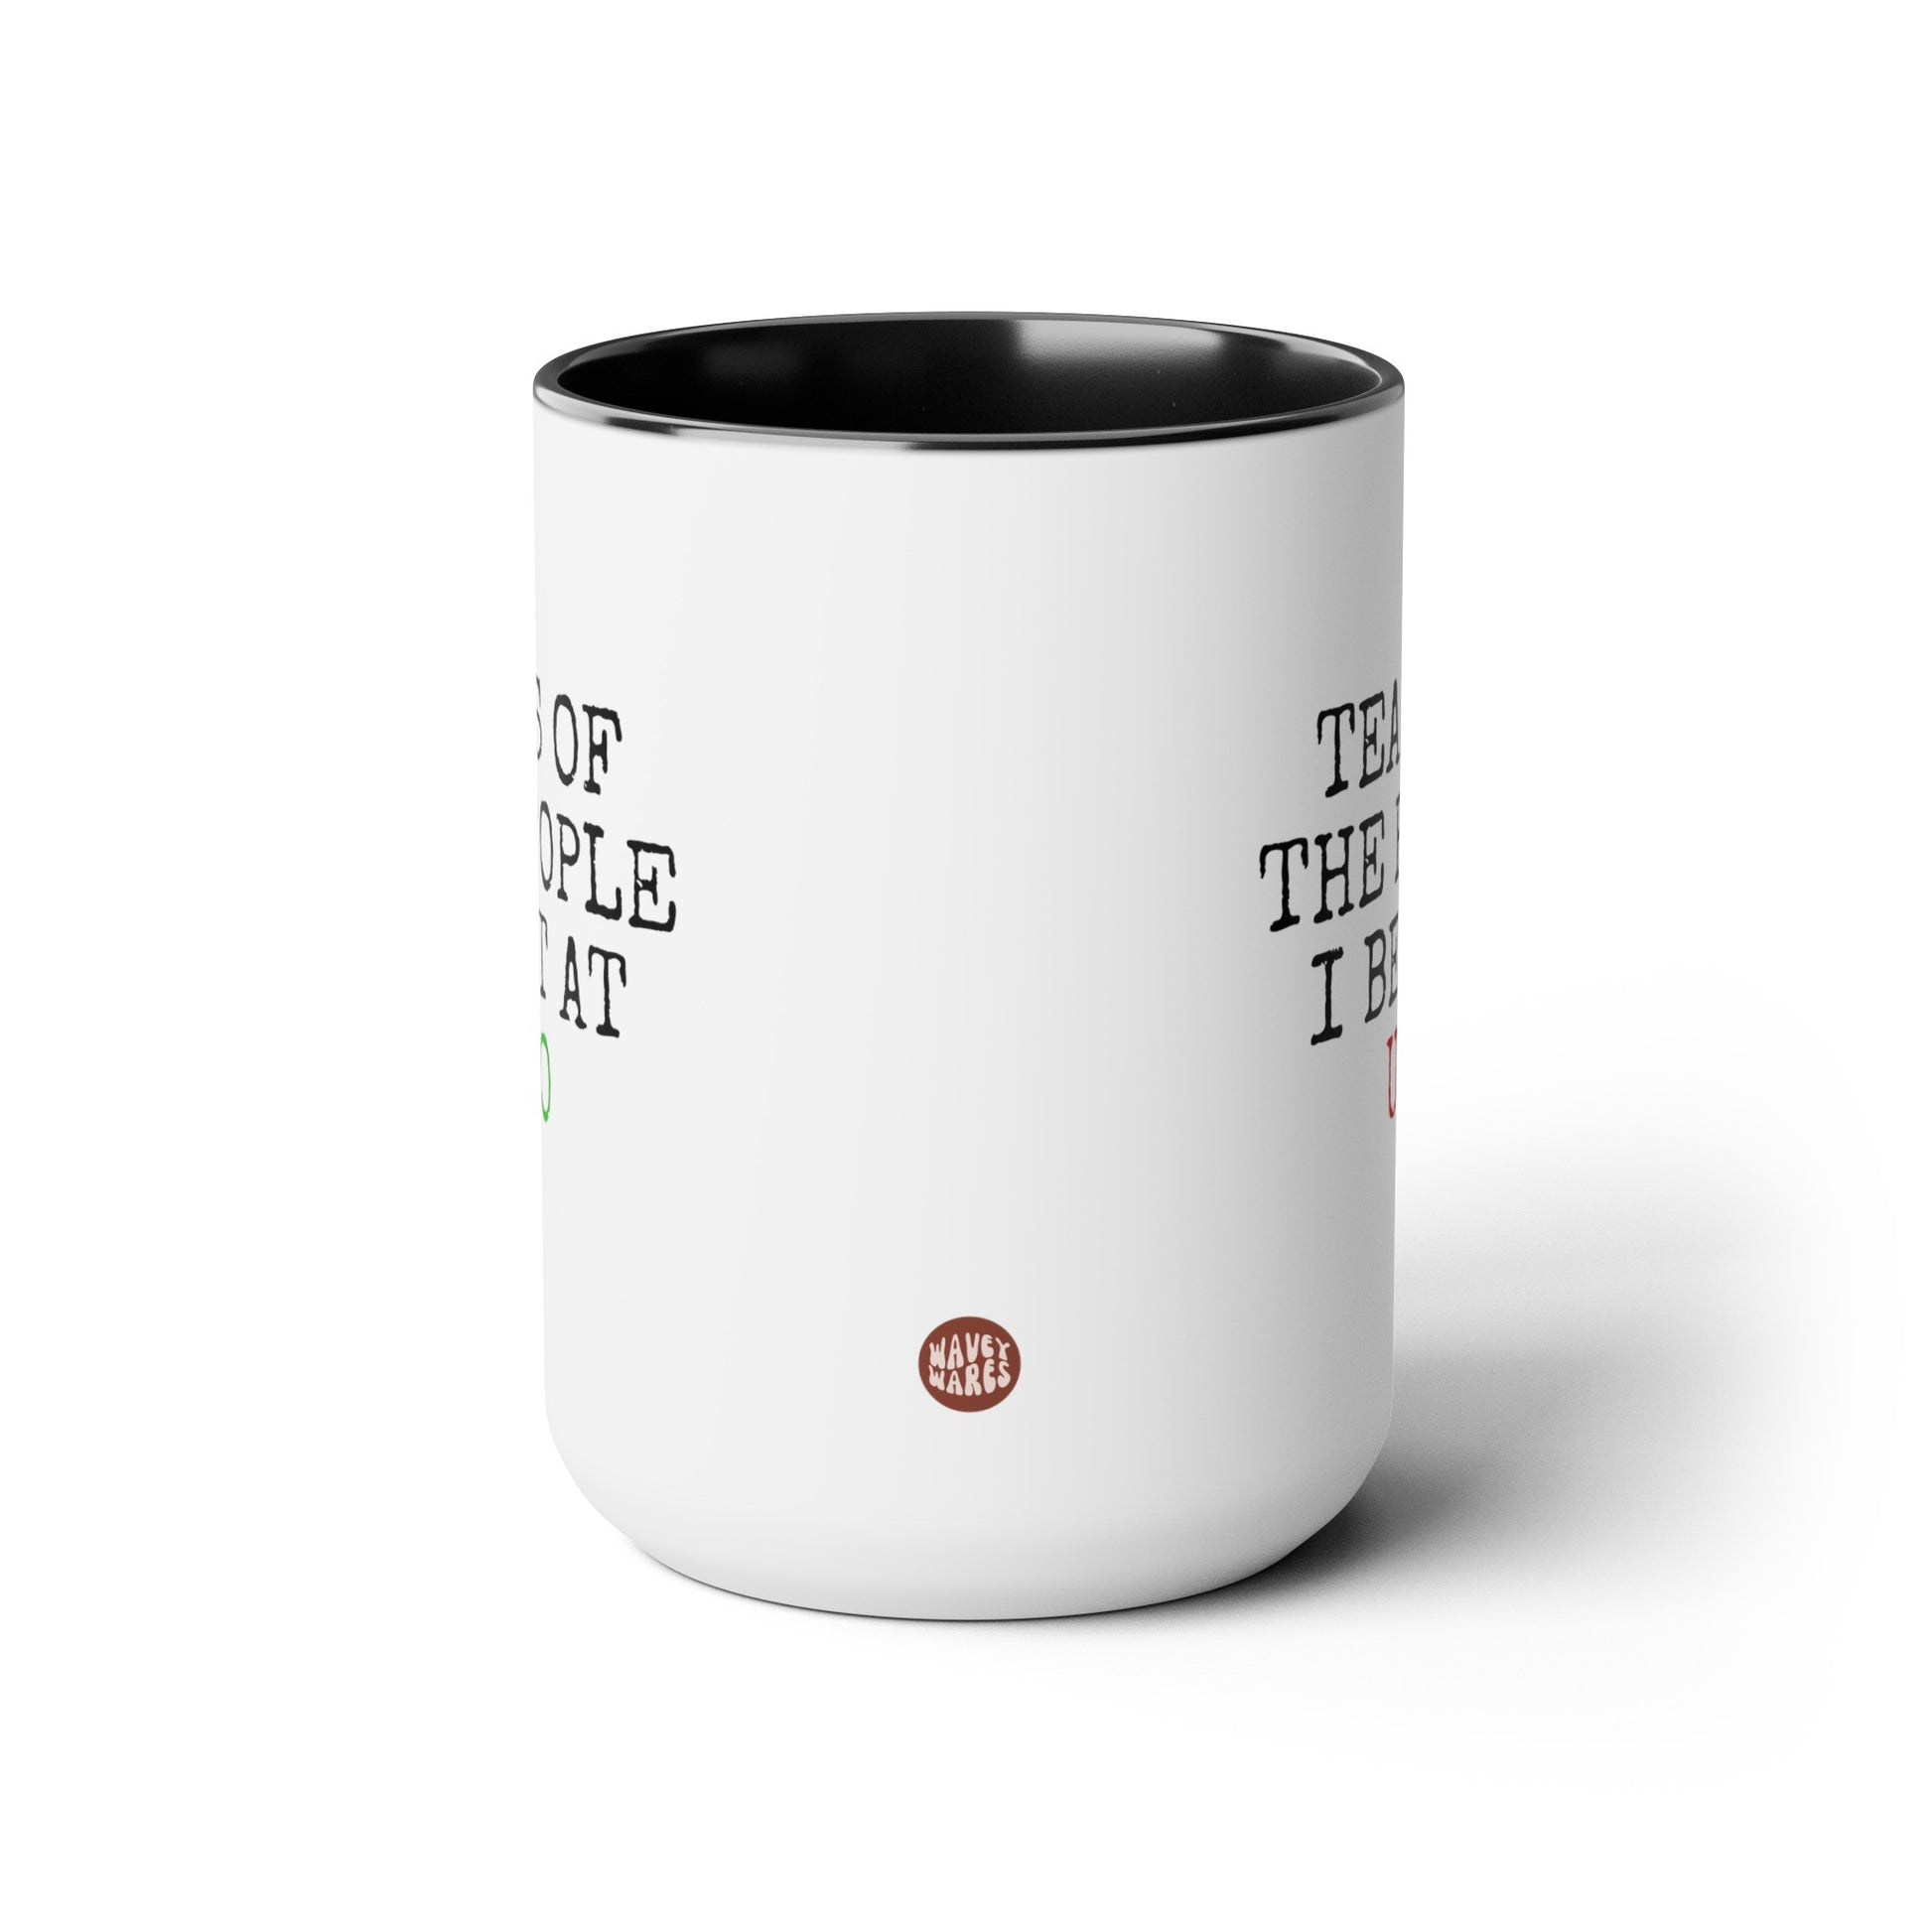 Tears Of The People I Beat At Uno 15oz white with black accent funny large coffee mug gift for friends family game night card player waveywares wavey wares wavywares wavy wares side